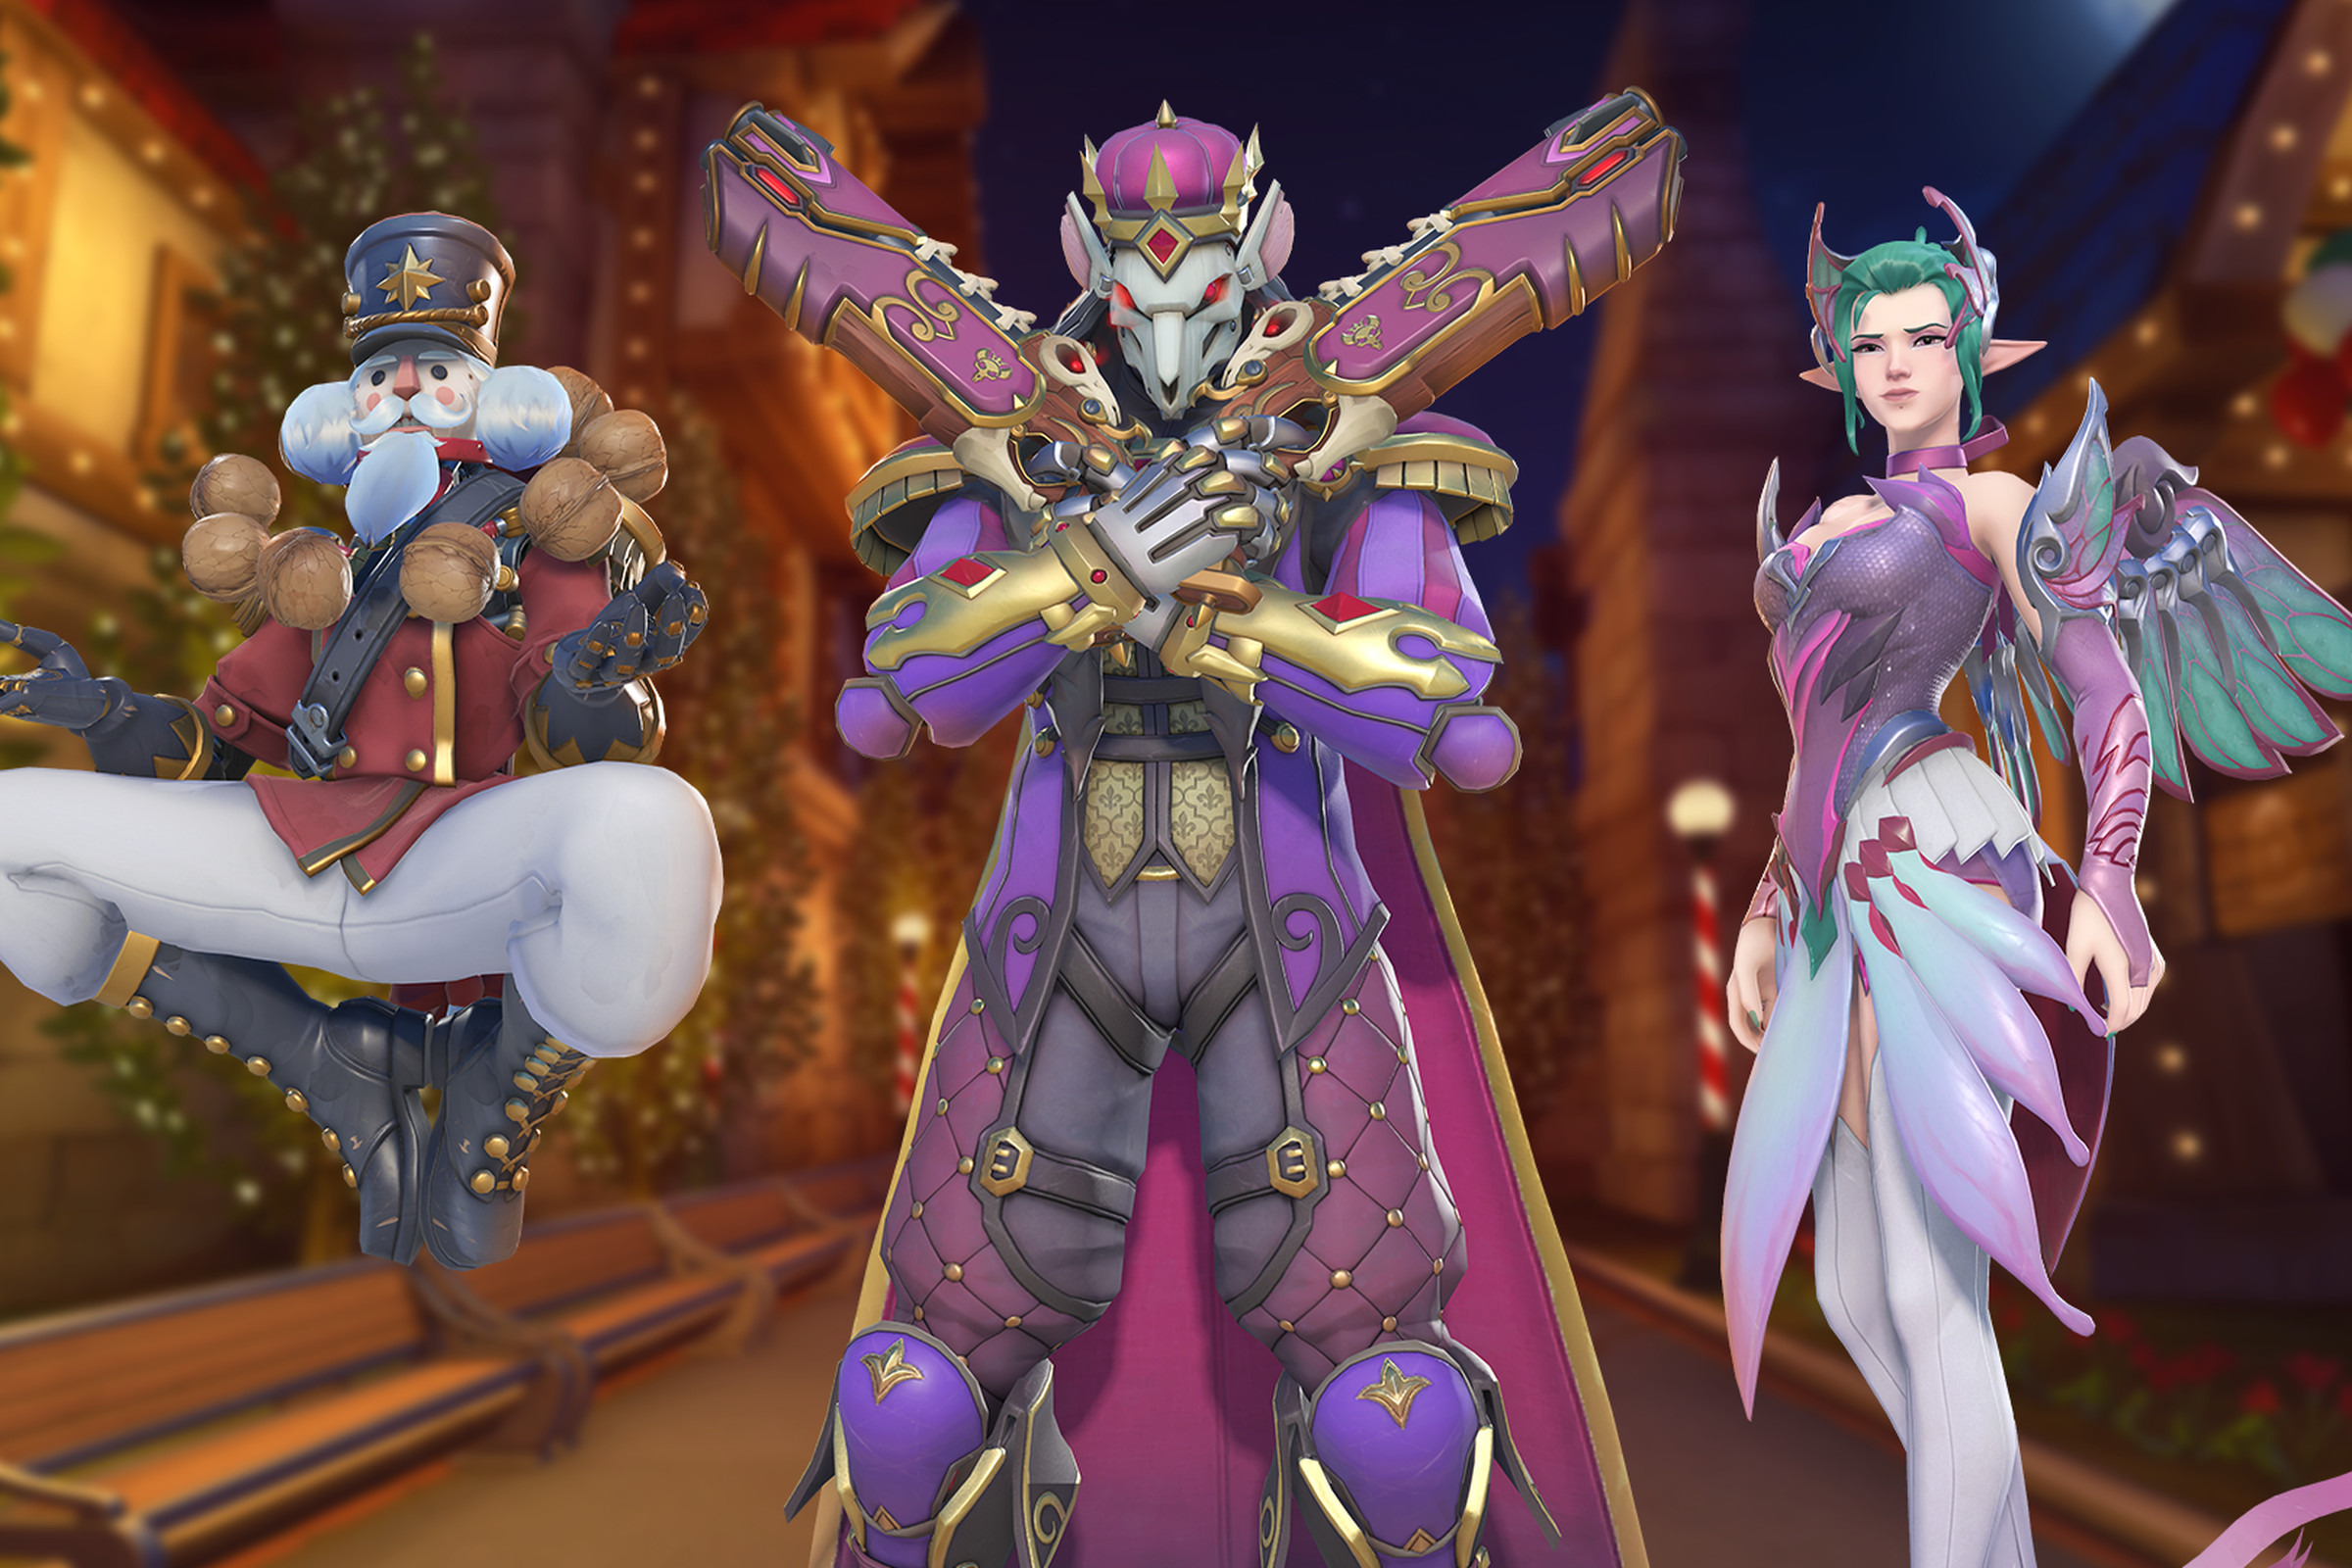 Screenshot from Overwatch 2 featuring Zenyatta, Reaper and Mercy in Christmas holiday-themed skins